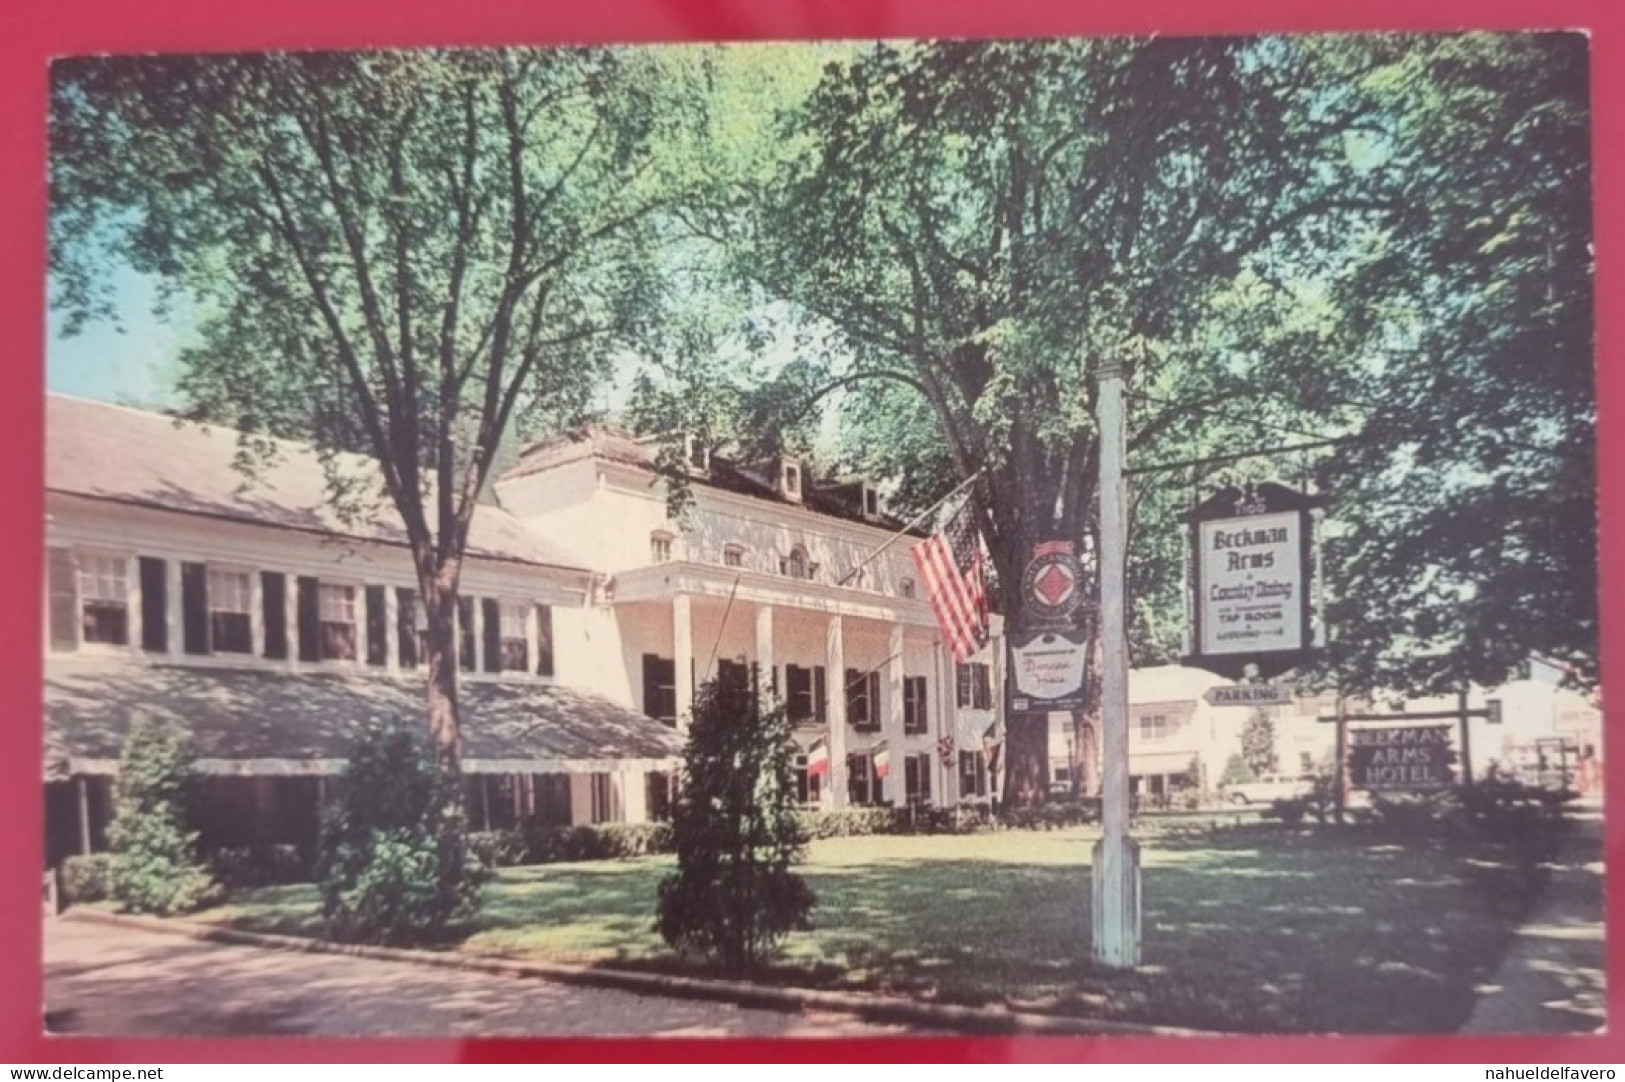 Uncirculated Postcard - USA - NY, NEW YORK - BEEKMAN ARMS, OLDEST HOTEL IN AMERICA, RHINEBECK - Bars, Hotels & Restaurants